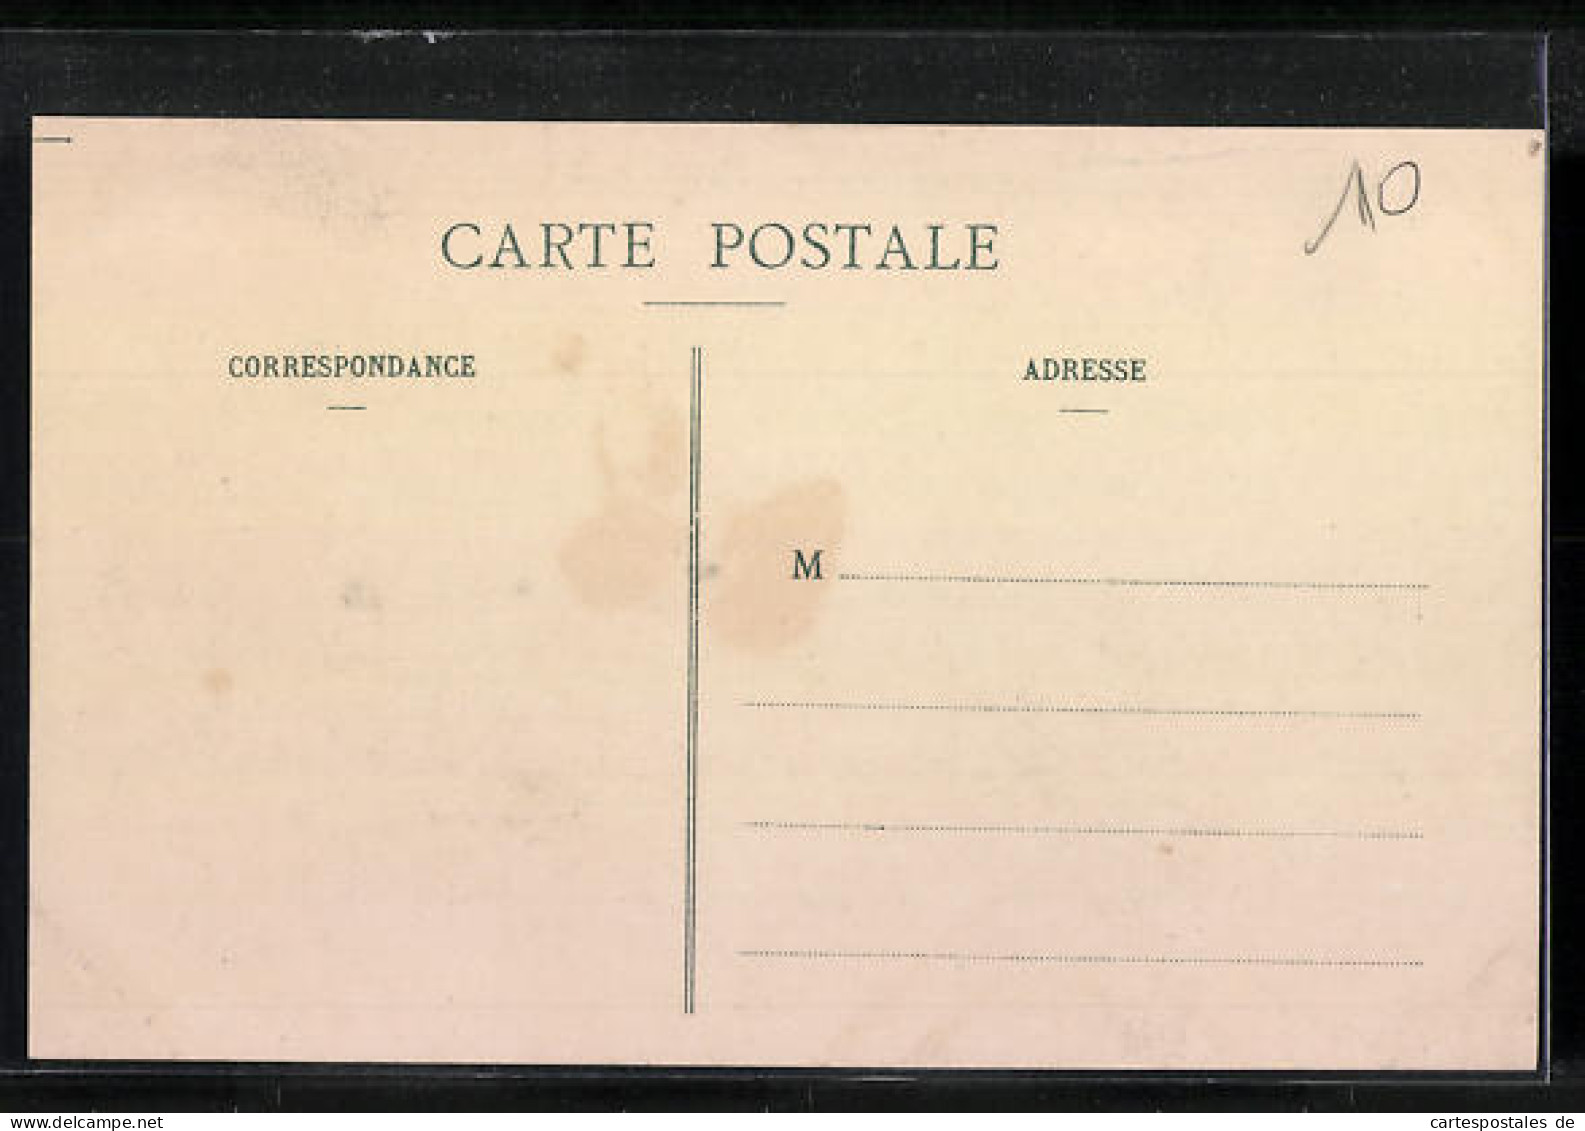 CPA Chambray, Paysage Au Bord De L`Eure  - Other & Unclassified